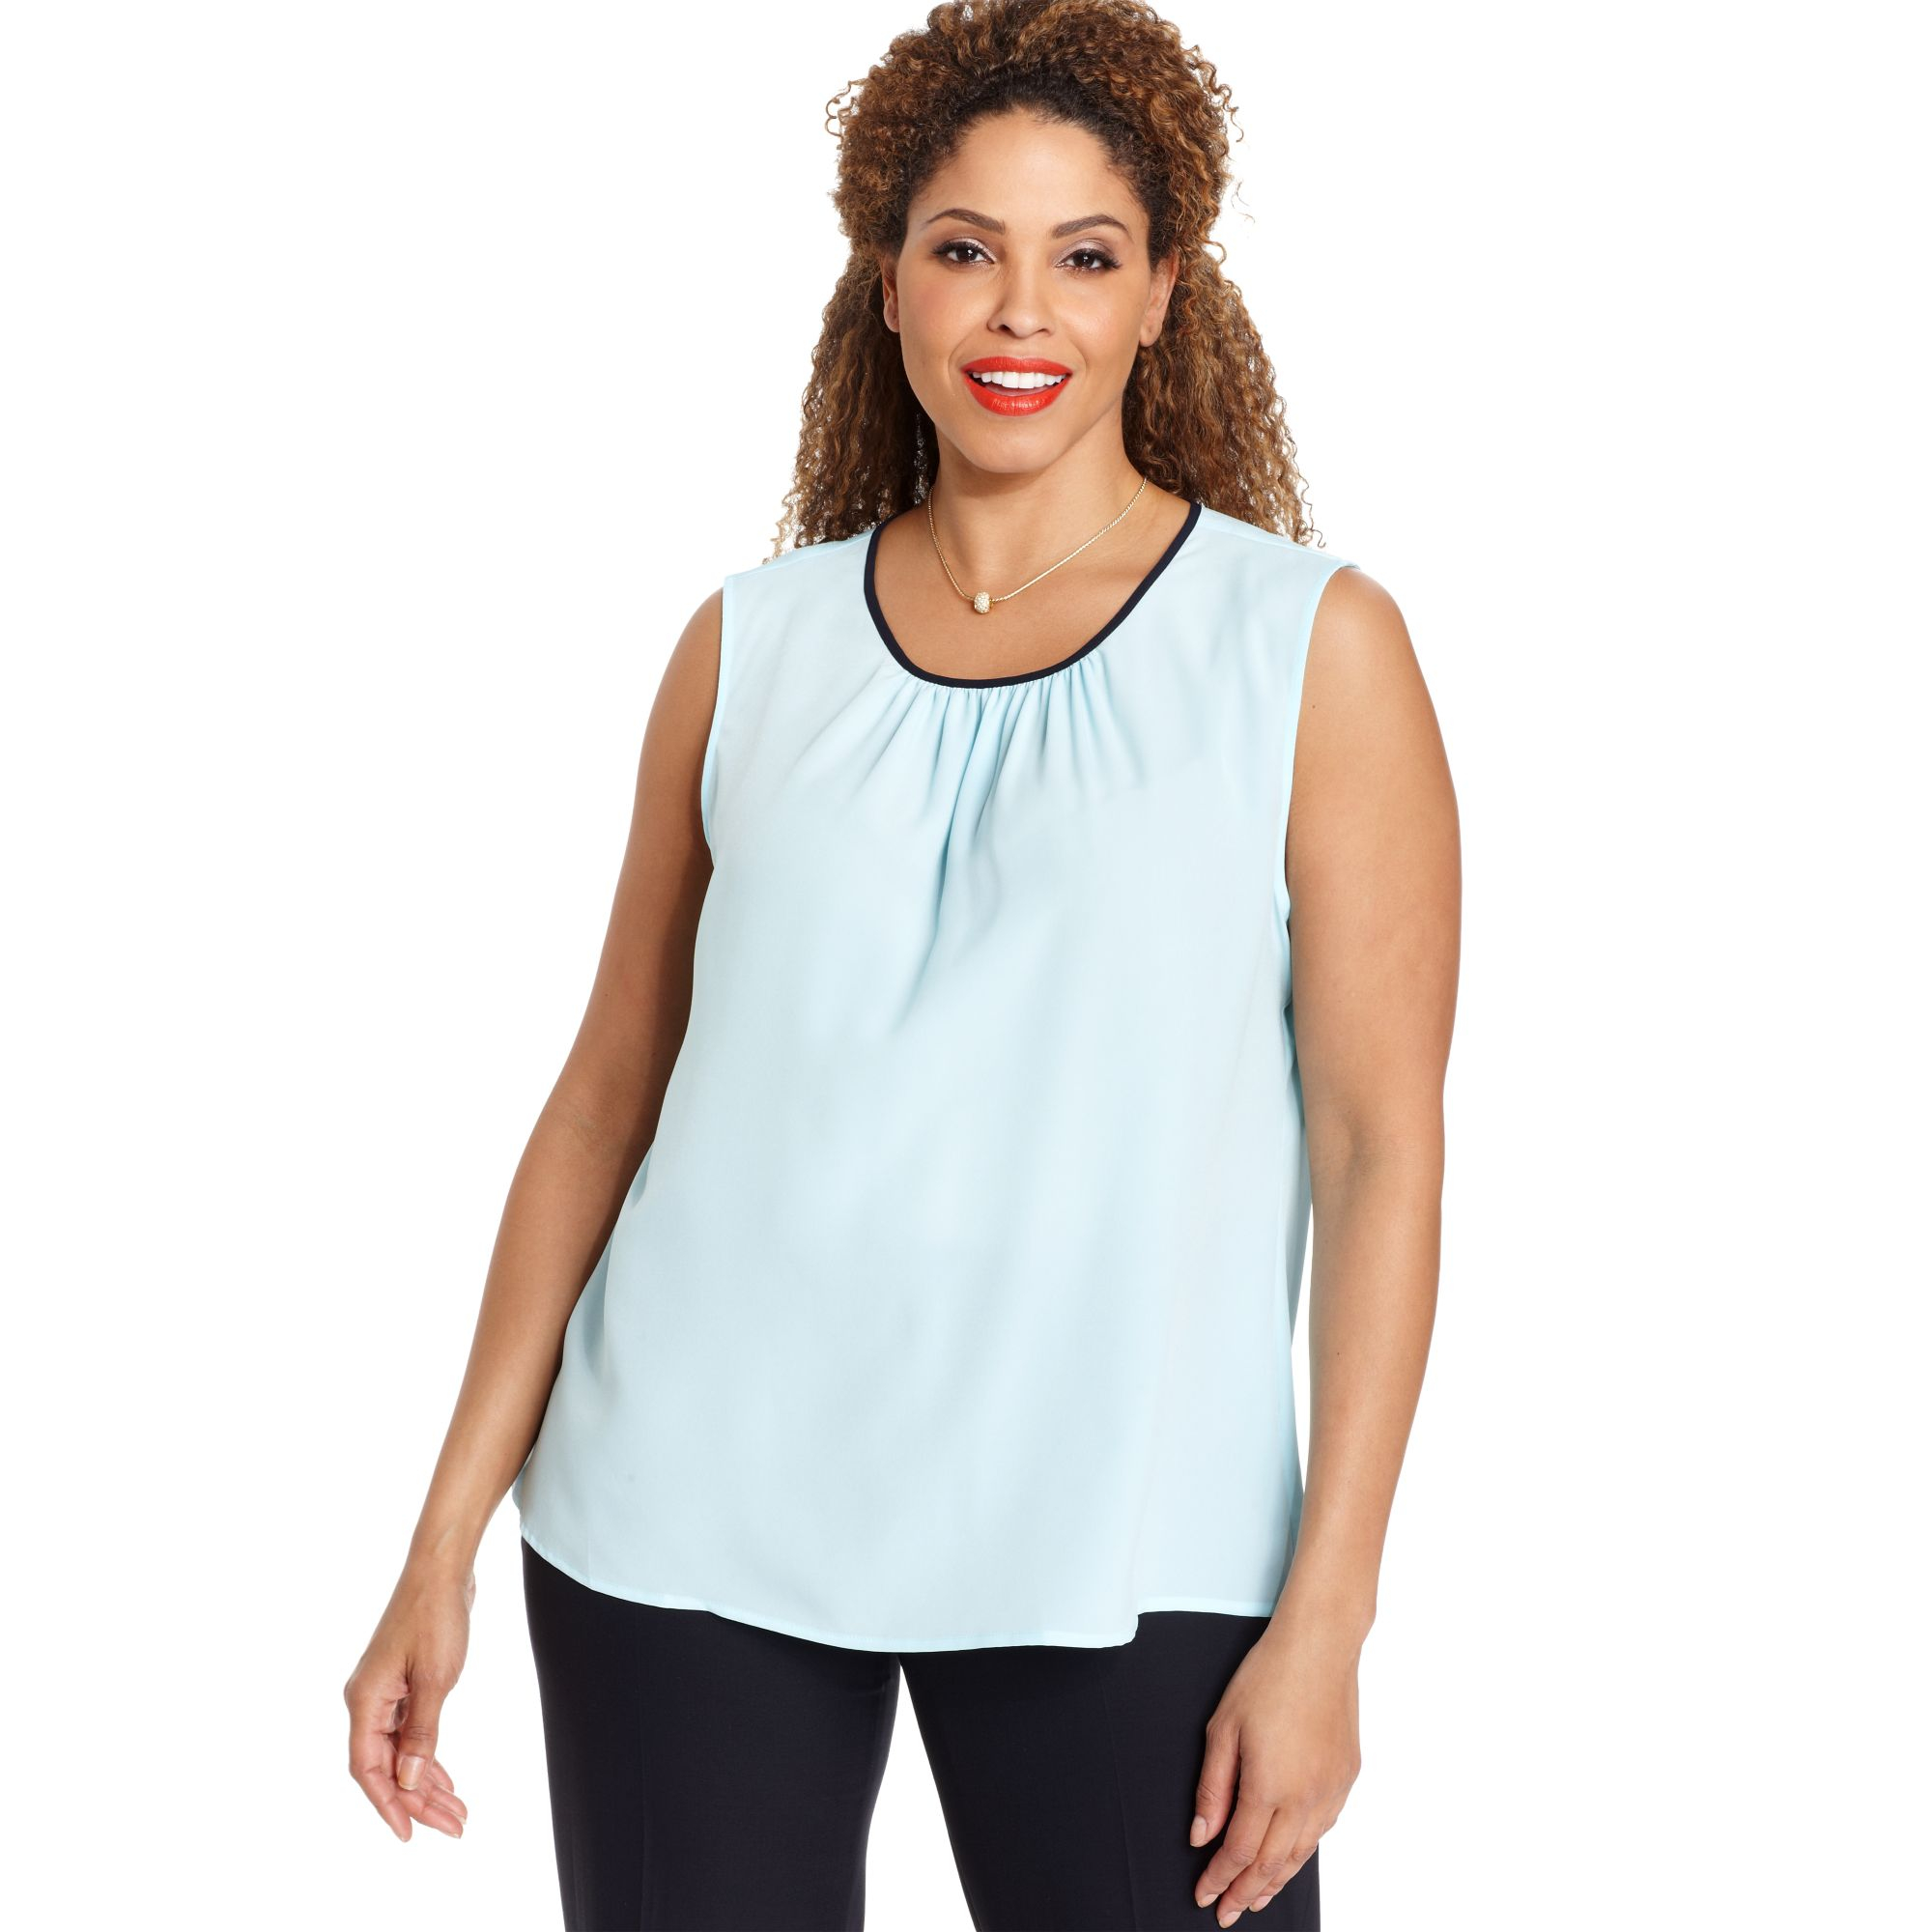 Online new york collection blouses plus size tops